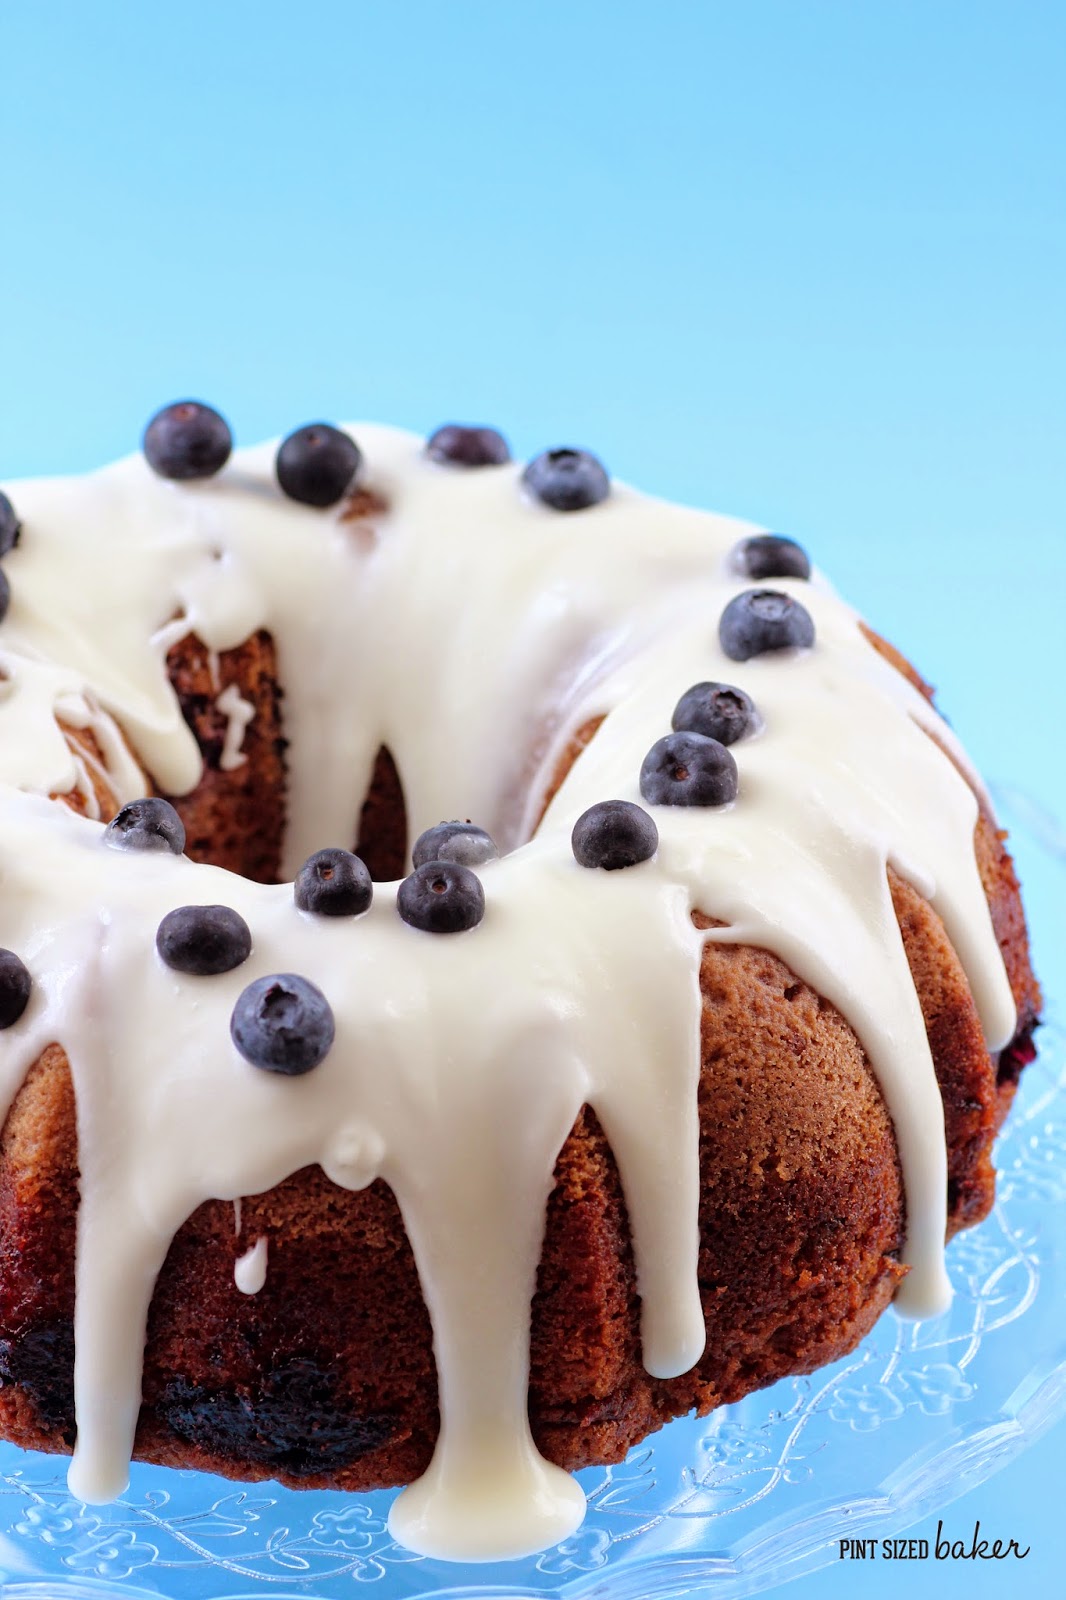 Bundt Cake drenched in a sugar glaze and stuffed full of Bluebrries